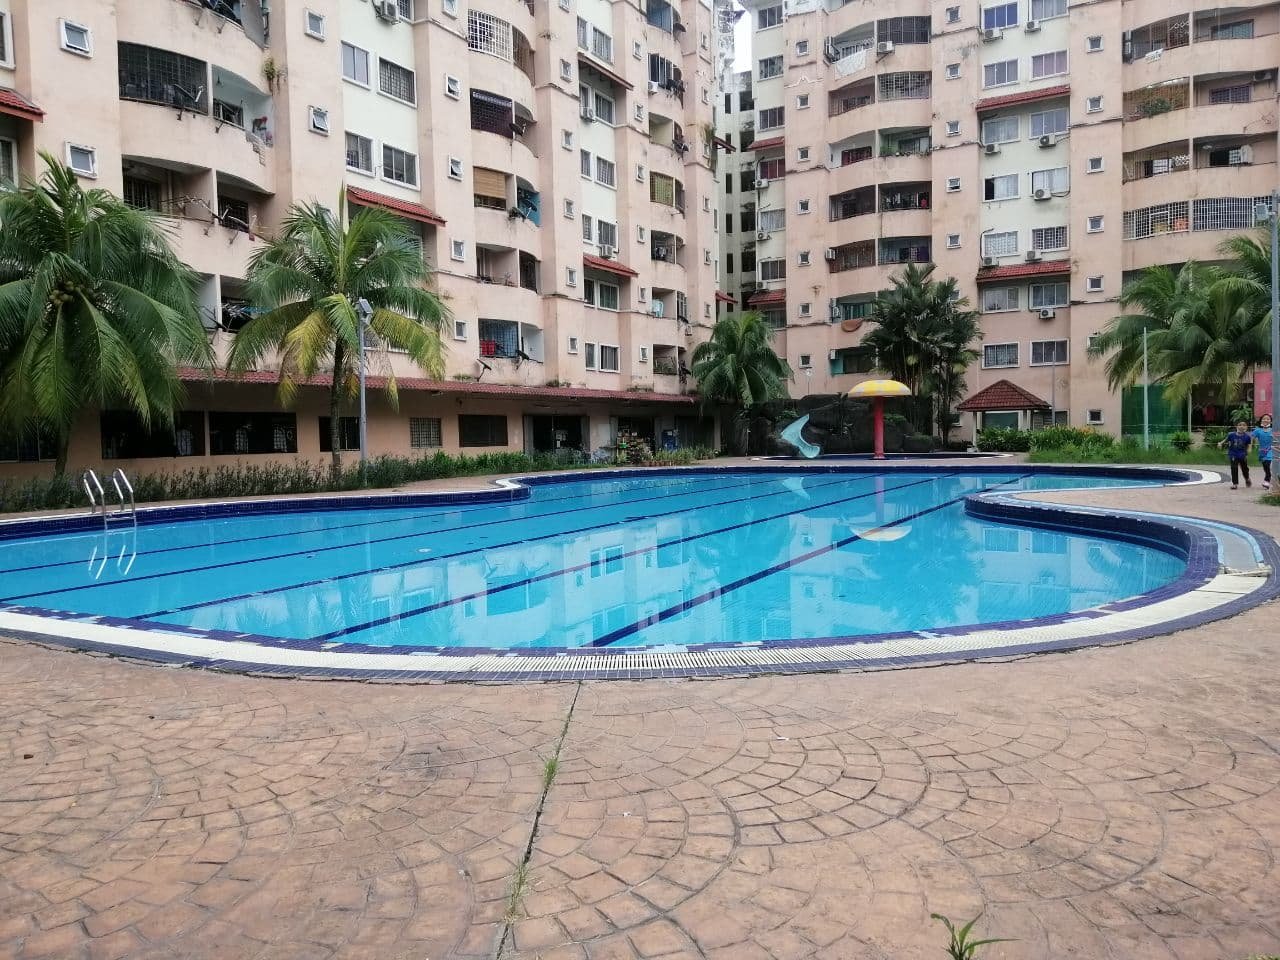 Freehold 2 Car Park Perdana Villa Apartment For Sale Rm180 000 By Nadiah Edgeprop My